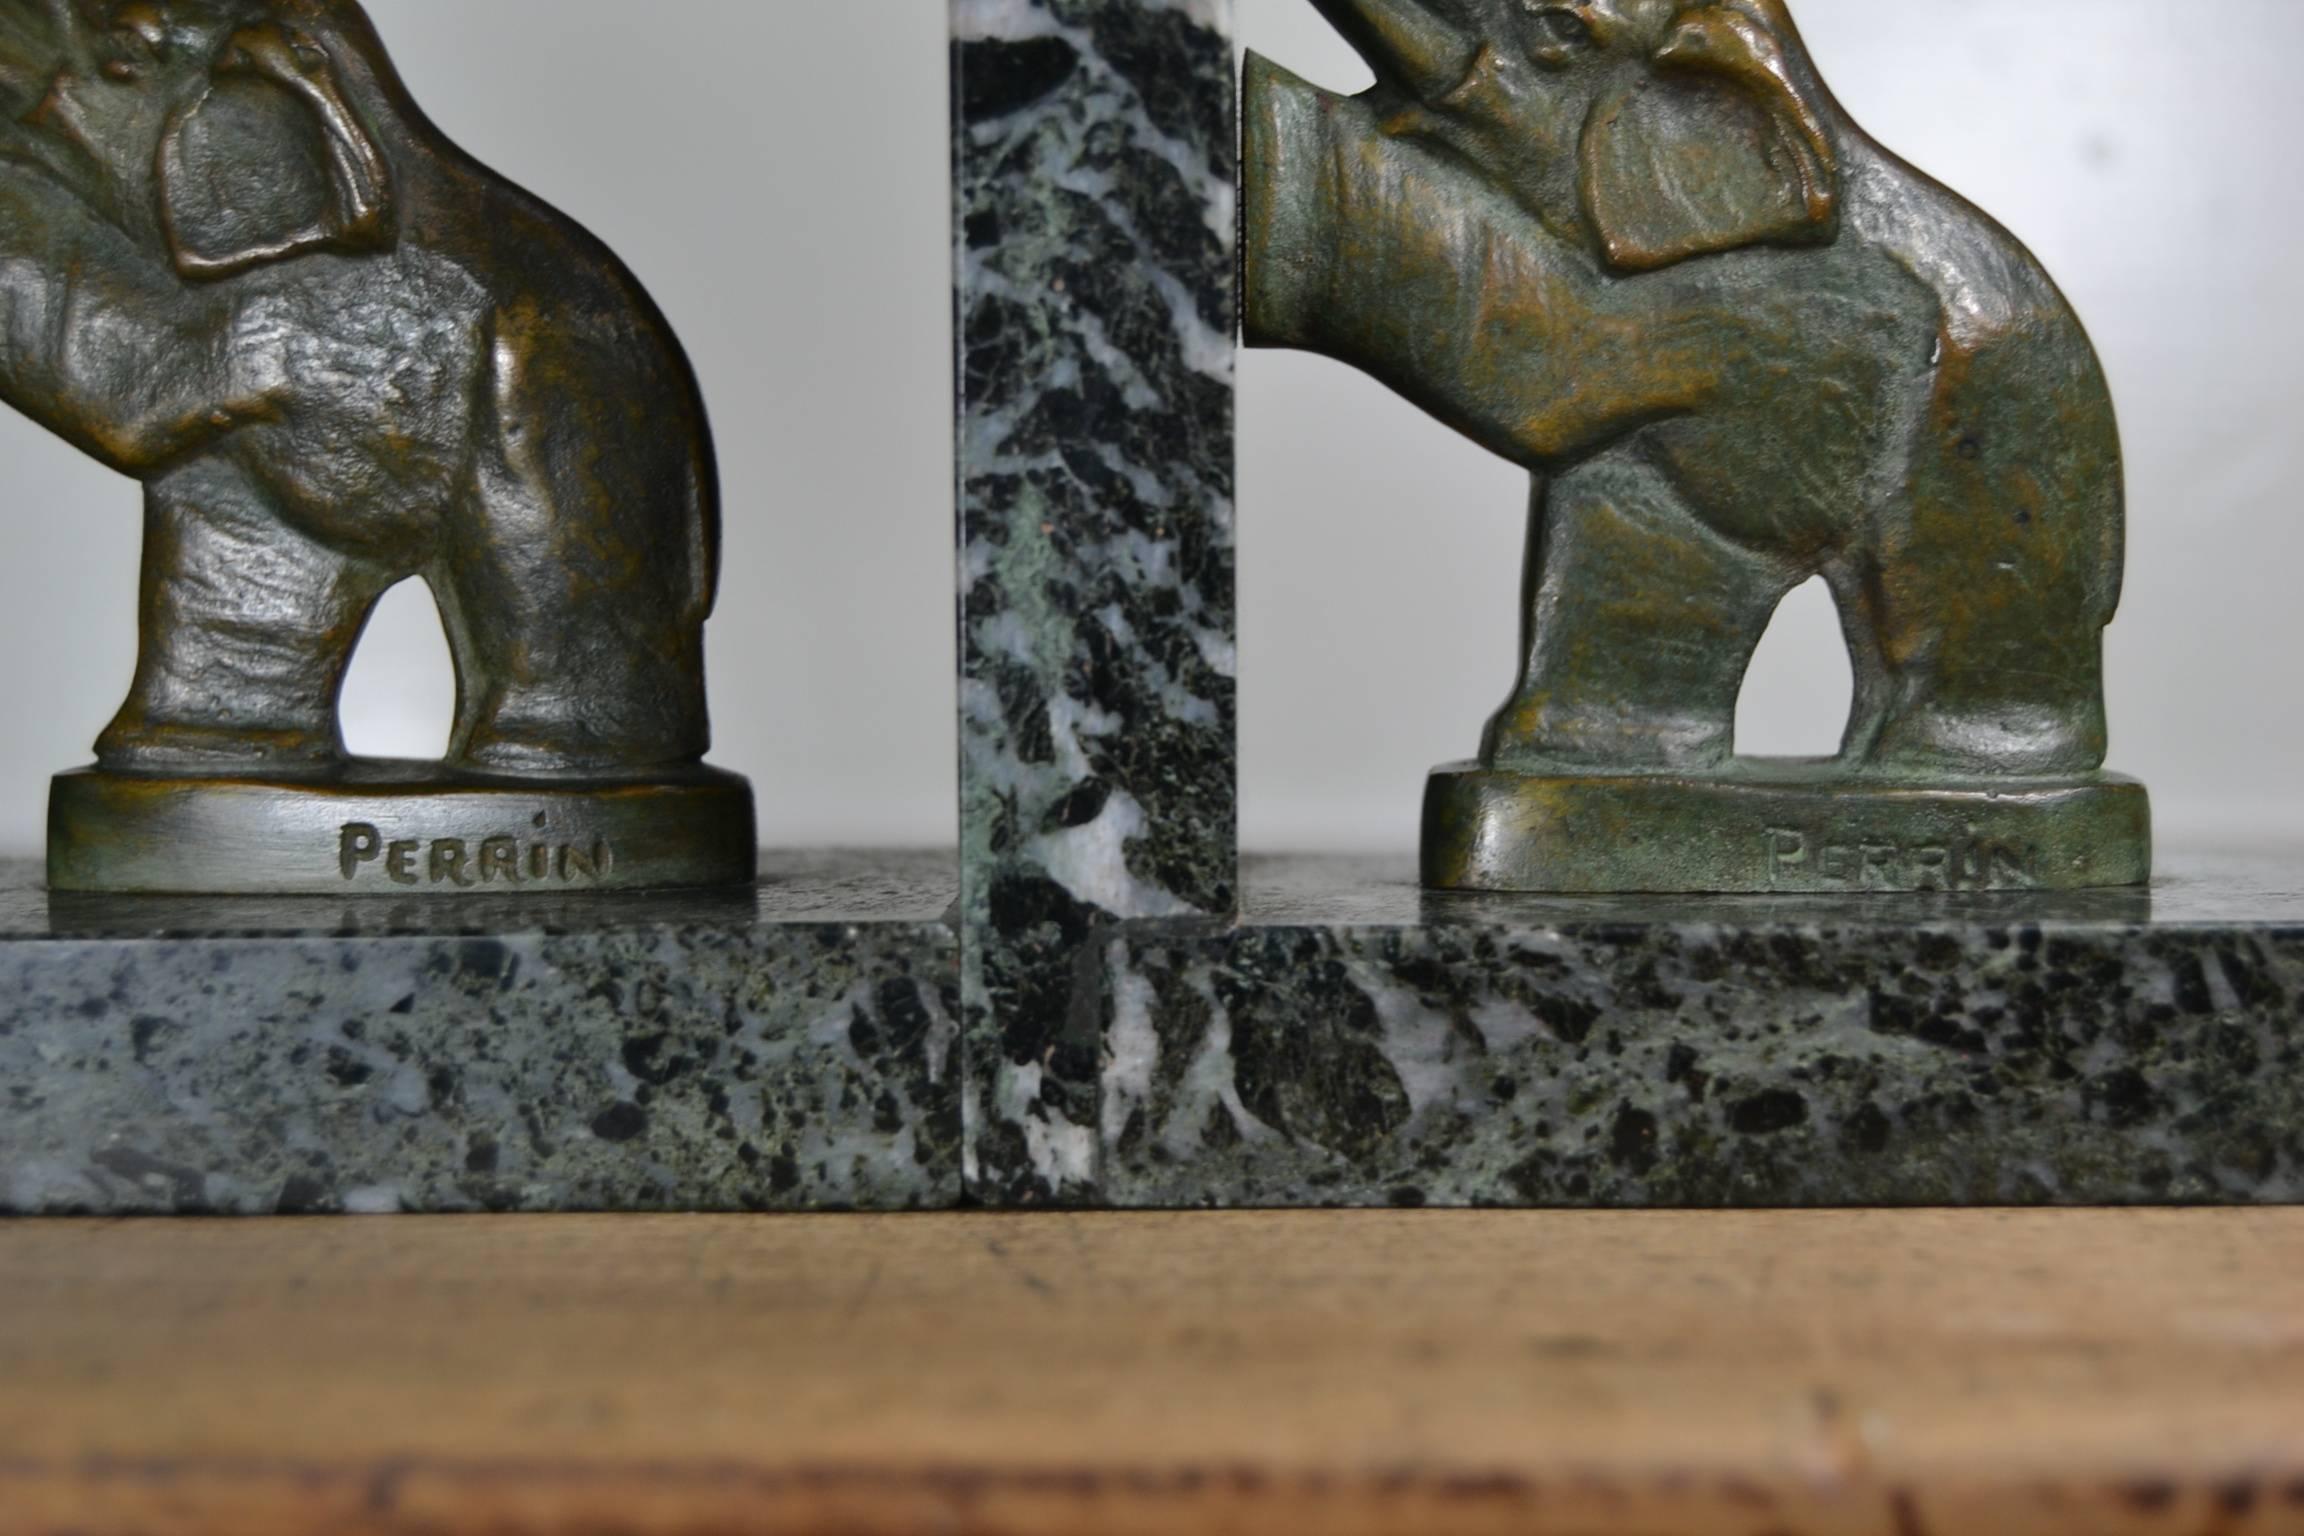 Pair of French Art Deco - Art Nouveau Elephant bookends on green veined marble, circa 1930. 
Bronze elephants on black - green - white marble both signed Perrin.
Both still in very good condition.